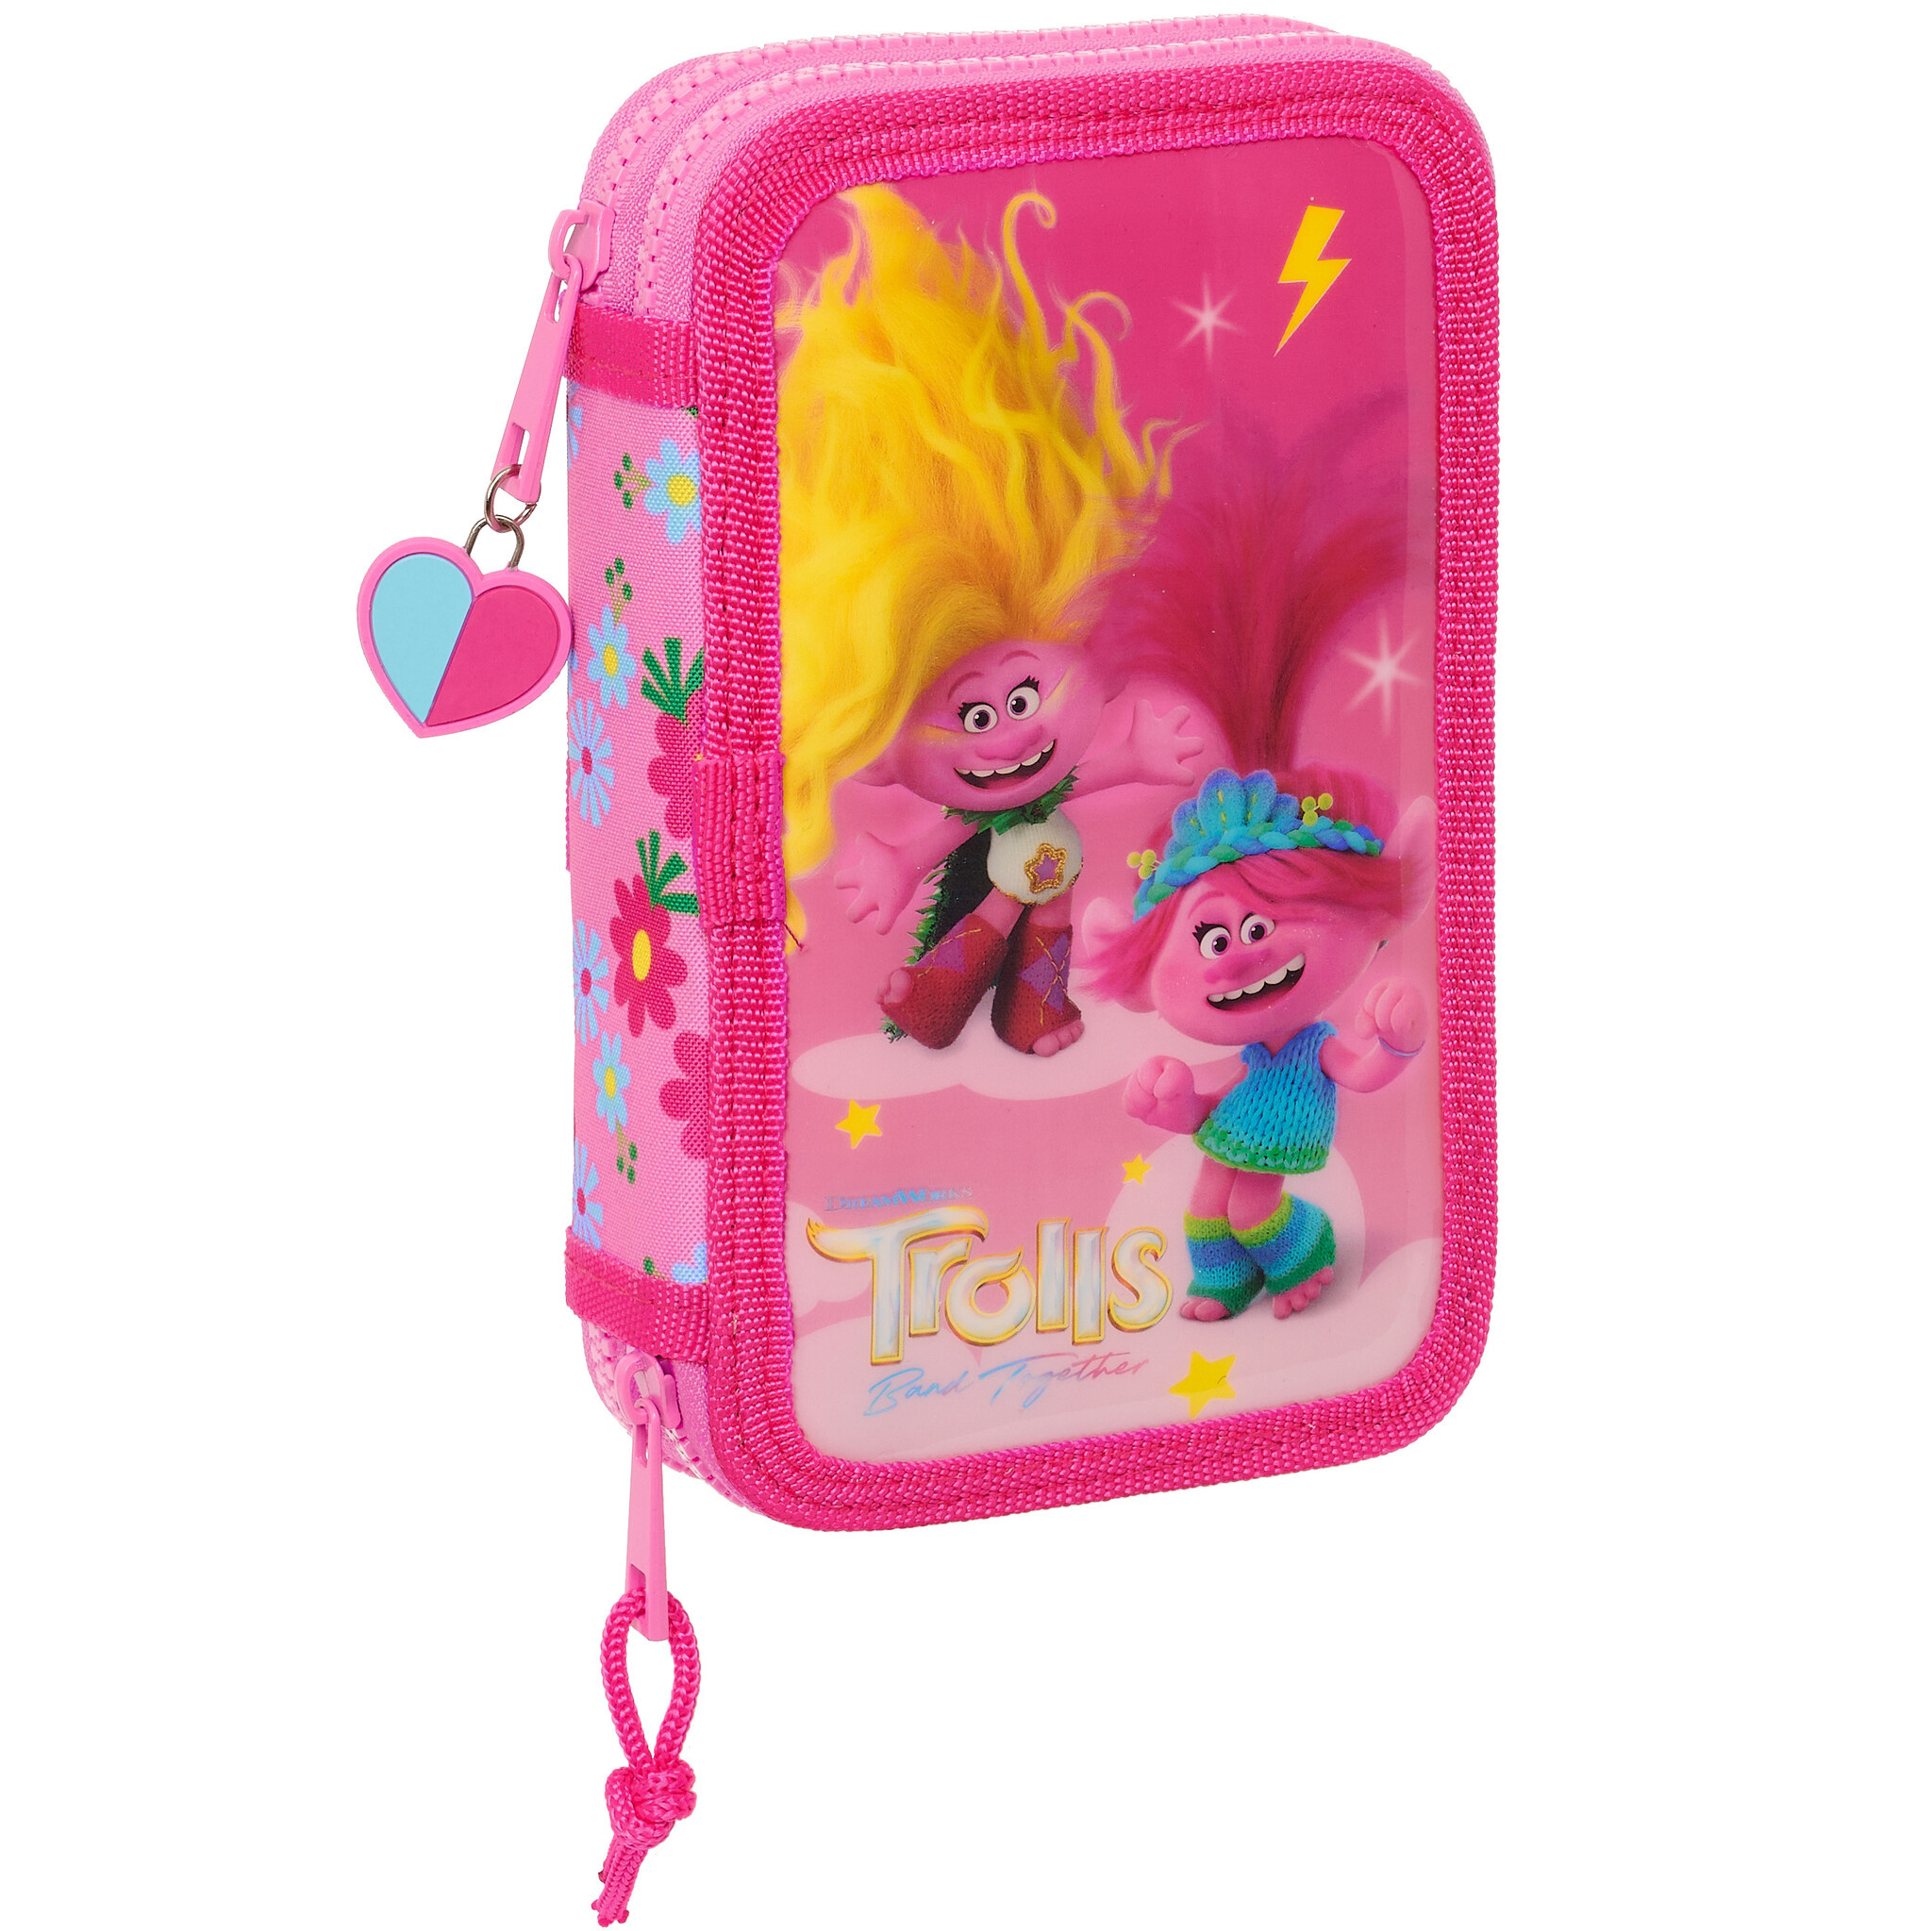 Trolls Filled Case, Band Together - 28 pcs. - 19.5 x 12.5 x 4 cm - Polyester